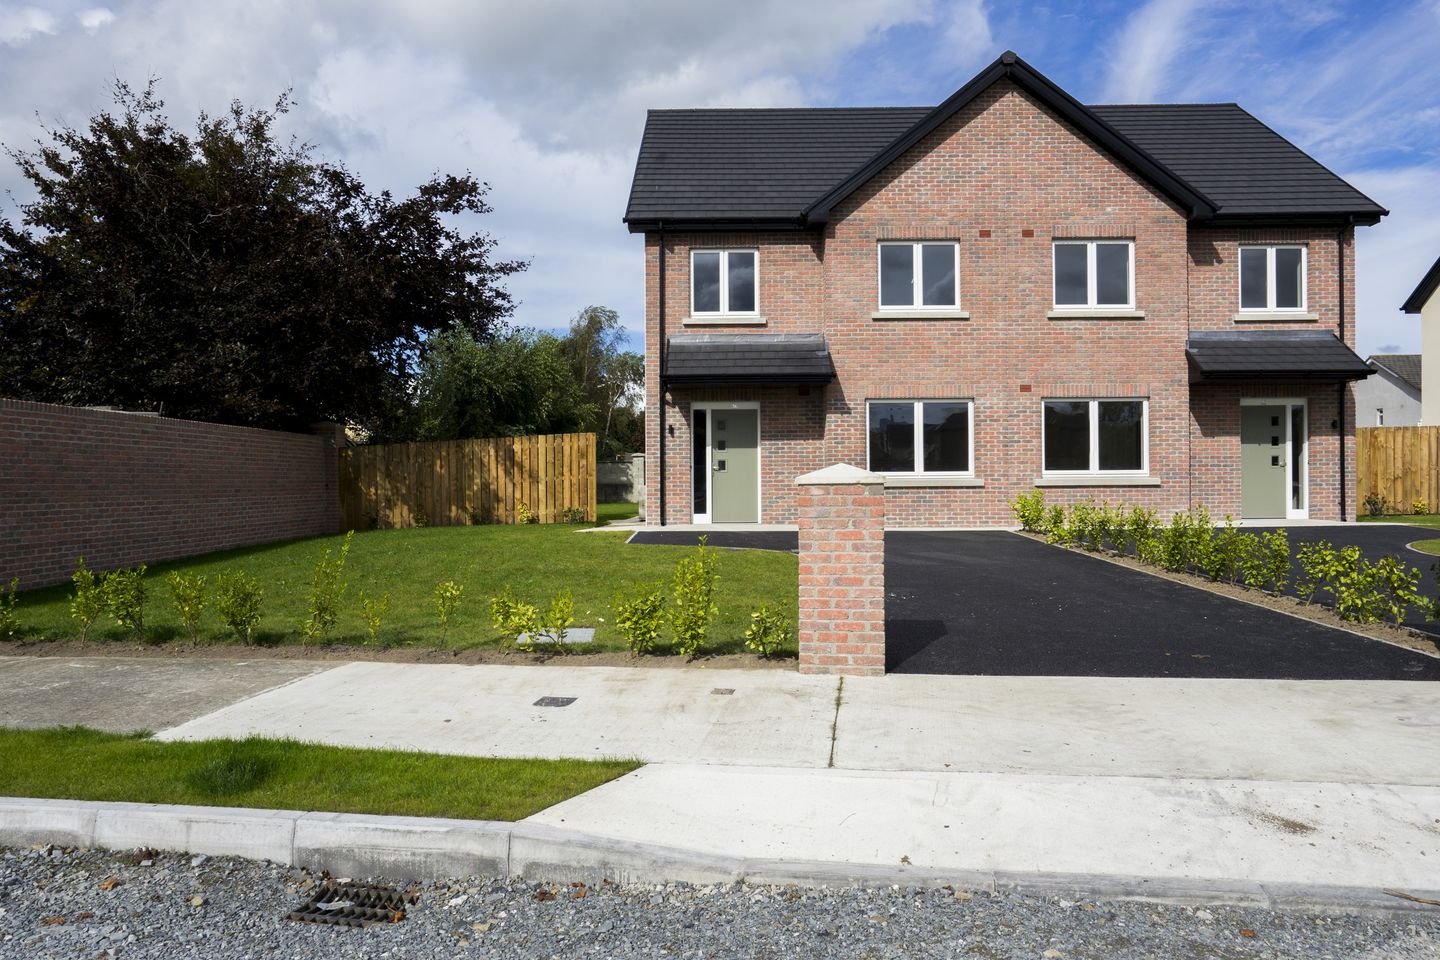 Seabrook, Commons Road, Dromiskin, Co. Louth